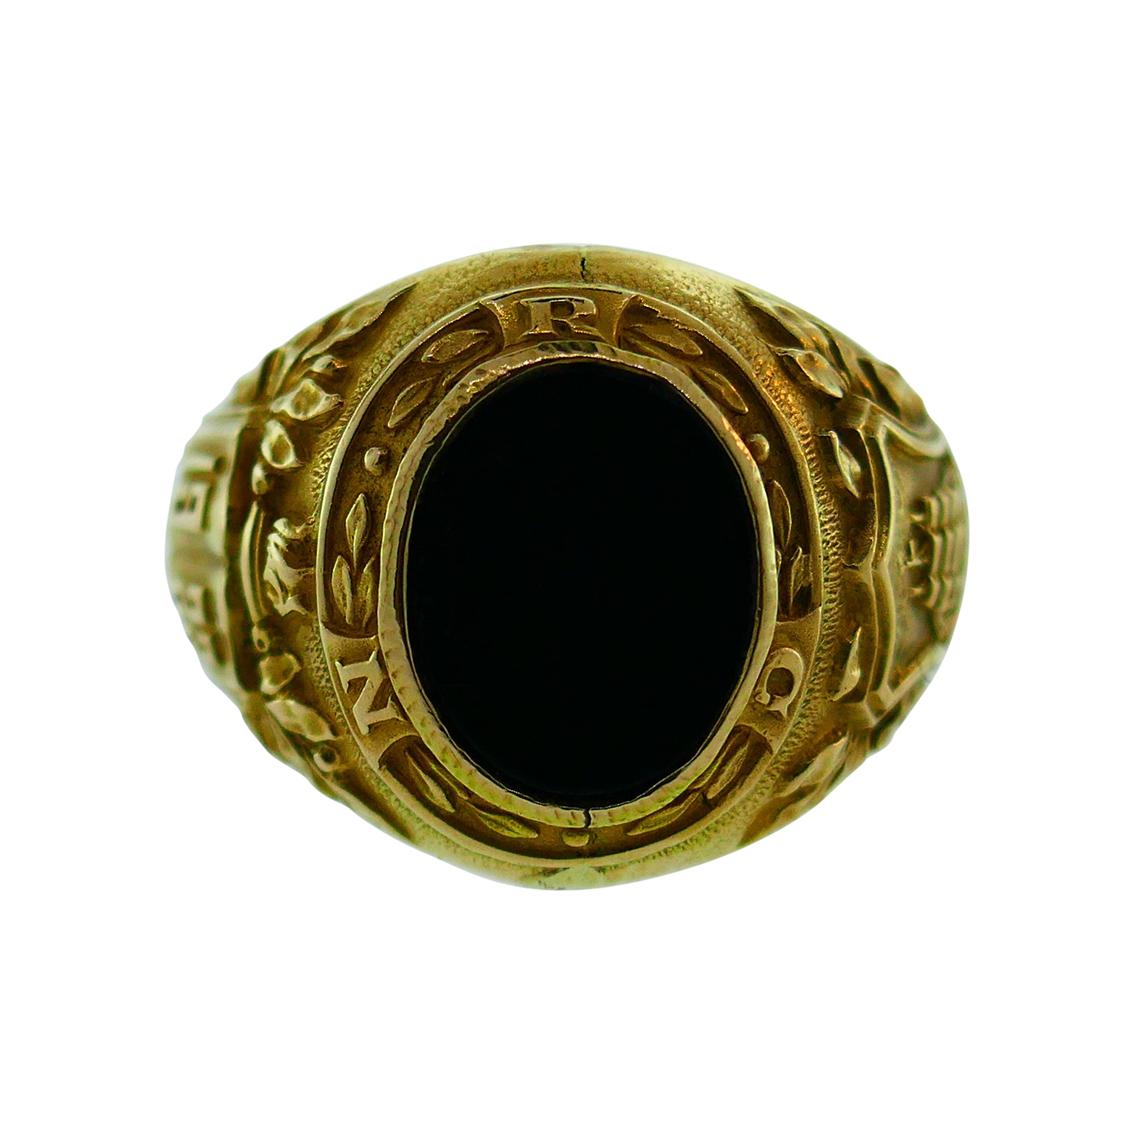 Tiffany & Co. Art Deco 14k Yellow Gold and Onyx College Class Ring, circa 1922